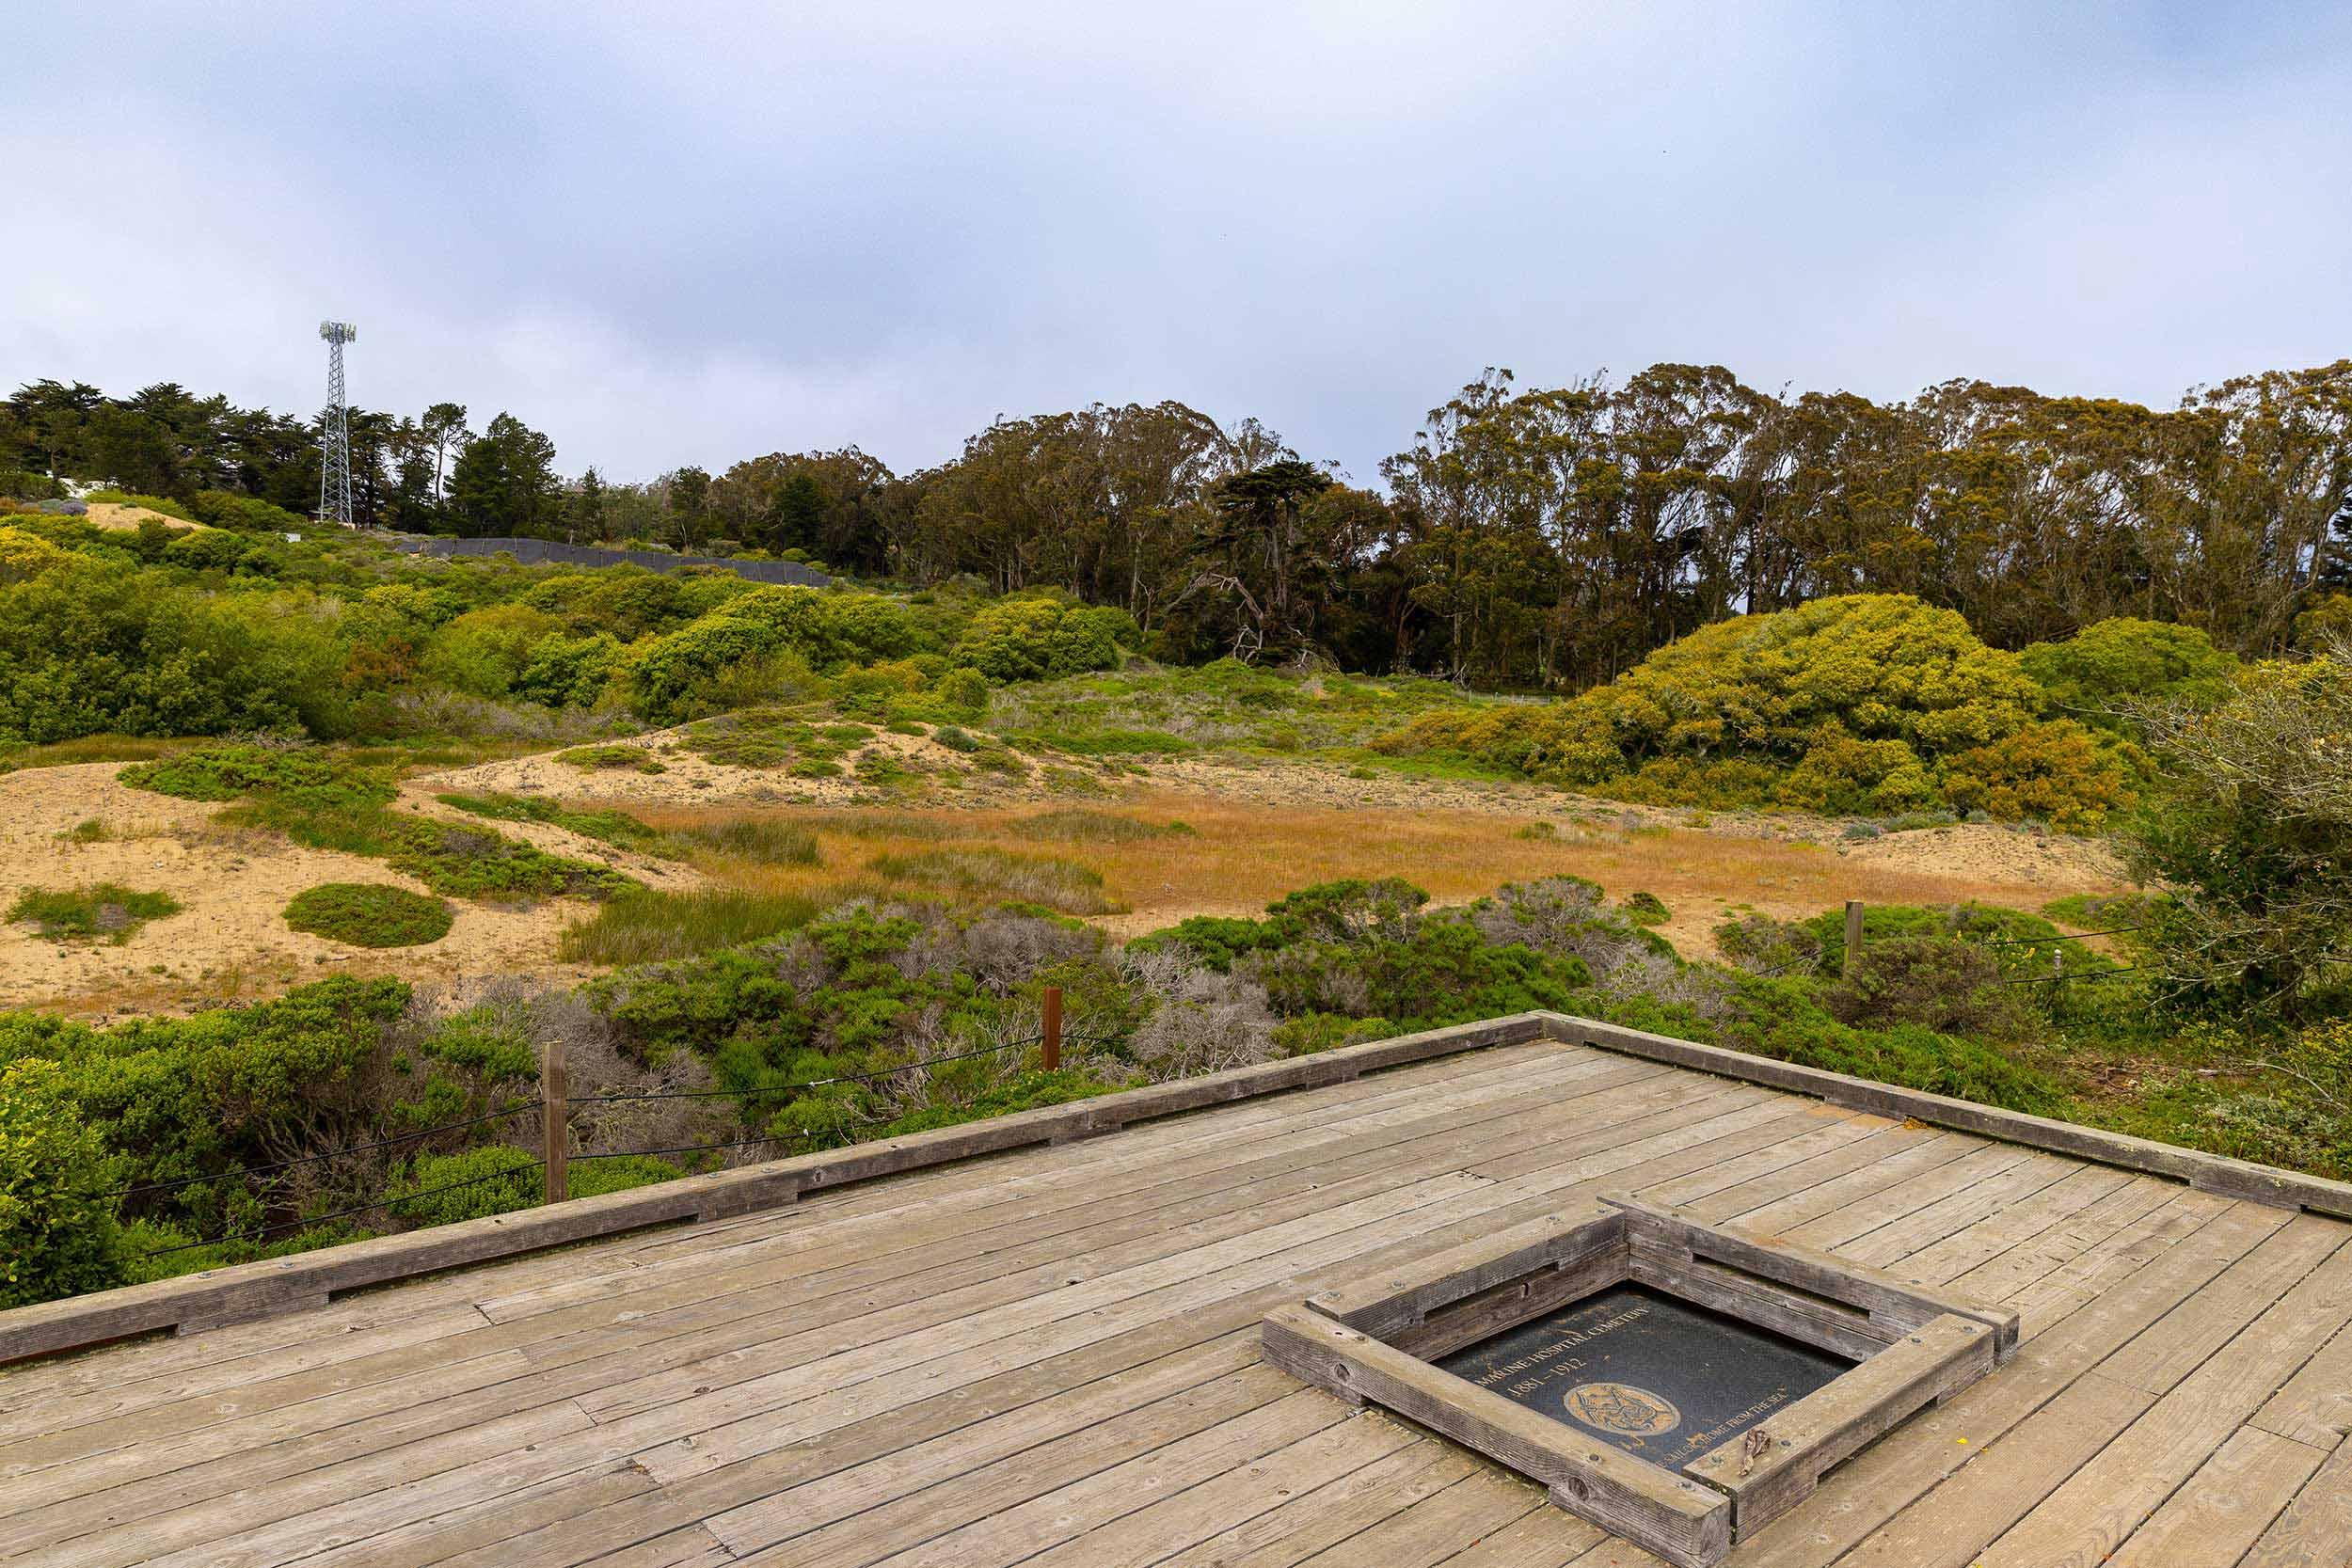 The elevated wooden plaza at the Marine Cemetery Vista in the Presidio, with a plaque and sand dunes. Photo by Myleen Hollero.